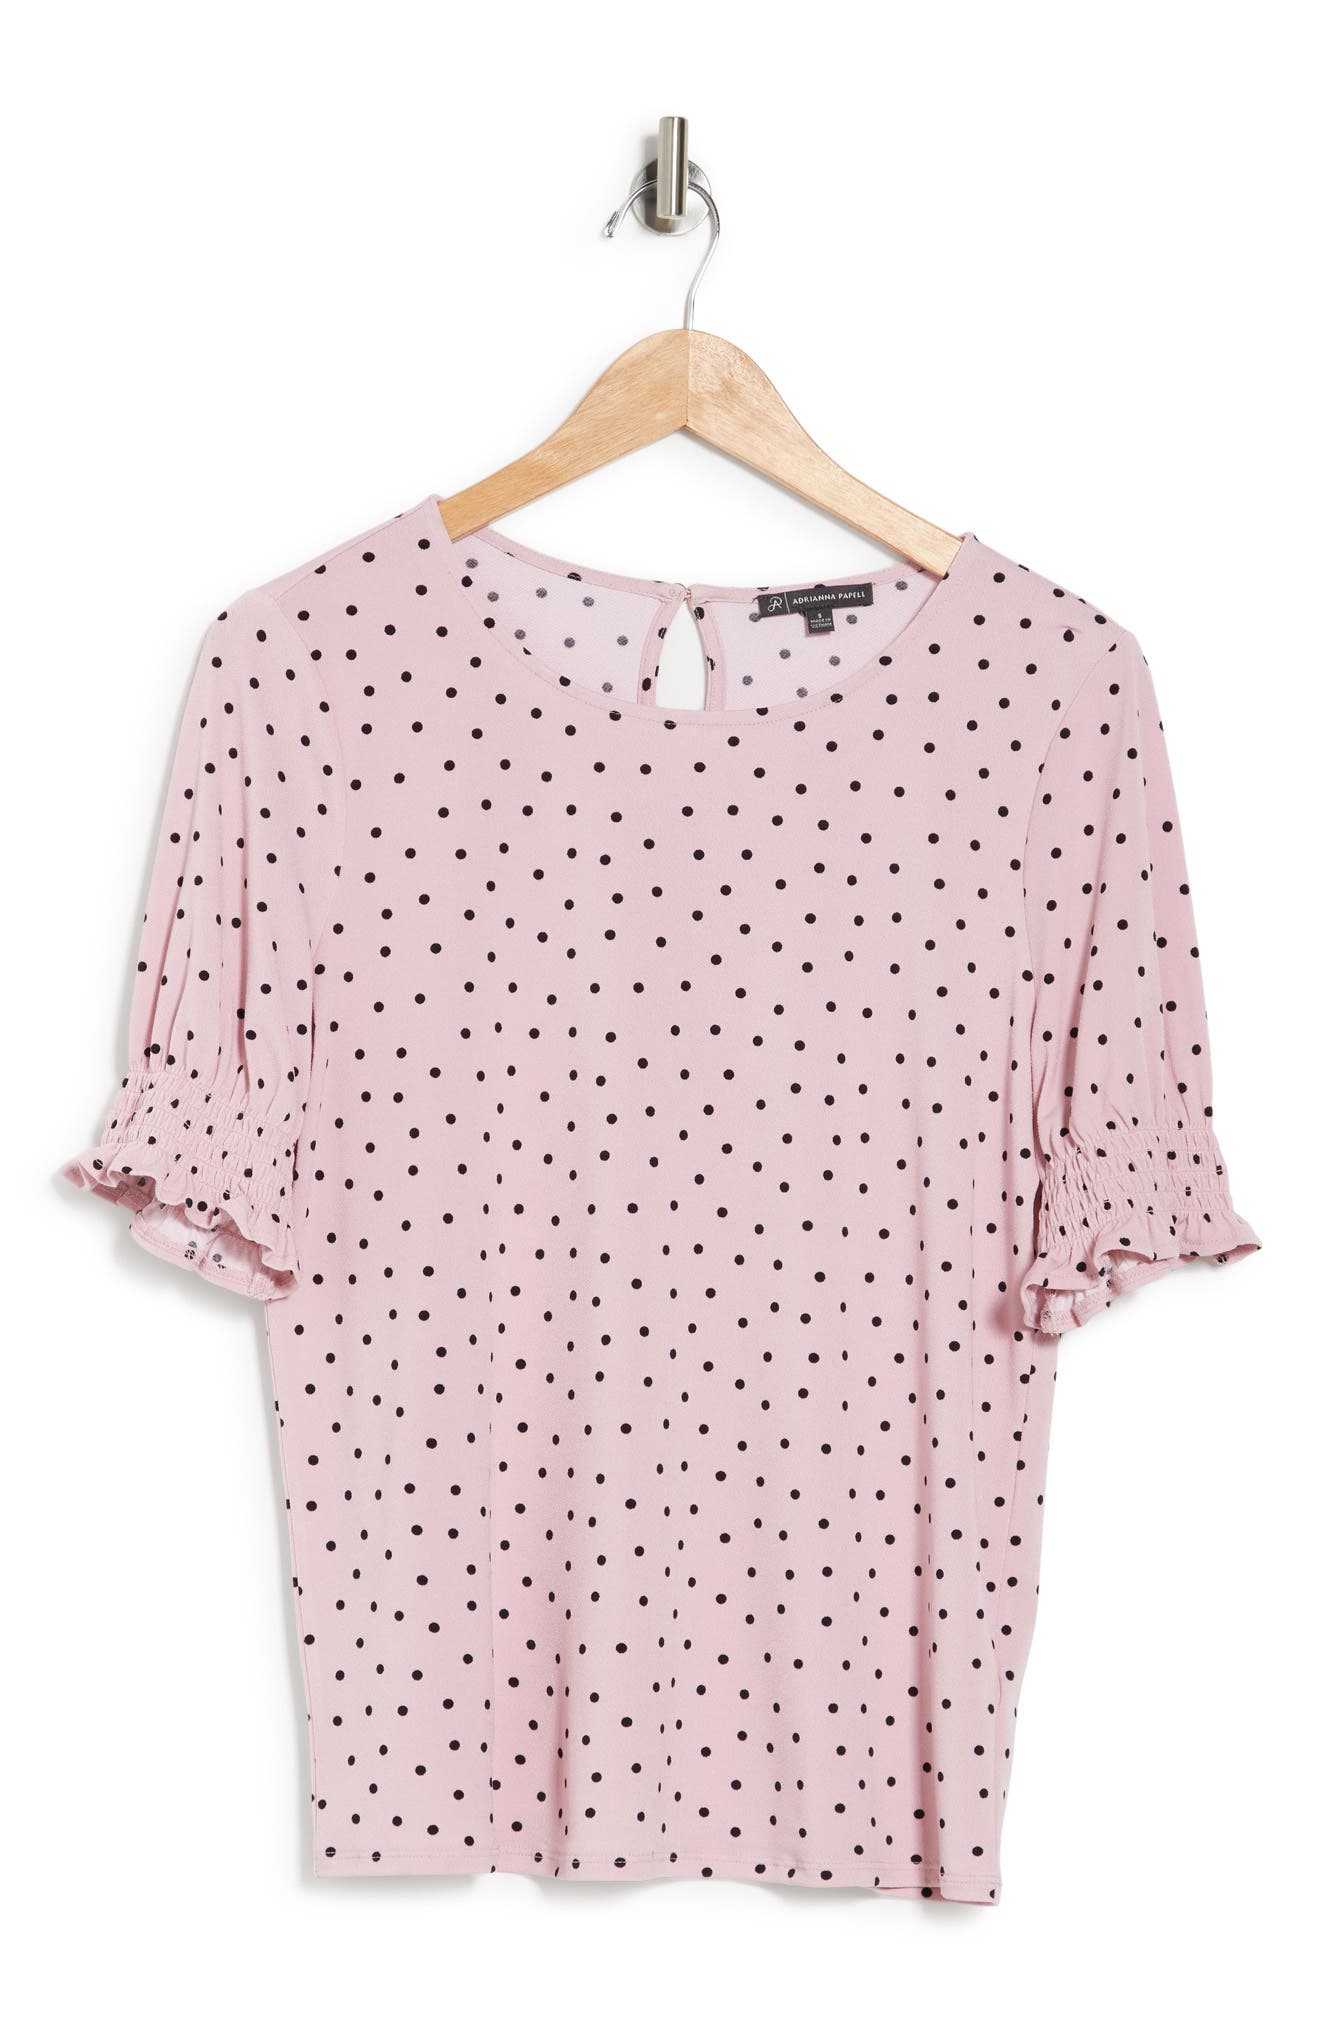 Adrianna Papell Polka Dot Puff Sleeve Moss Crepe Top In Blshbscdot